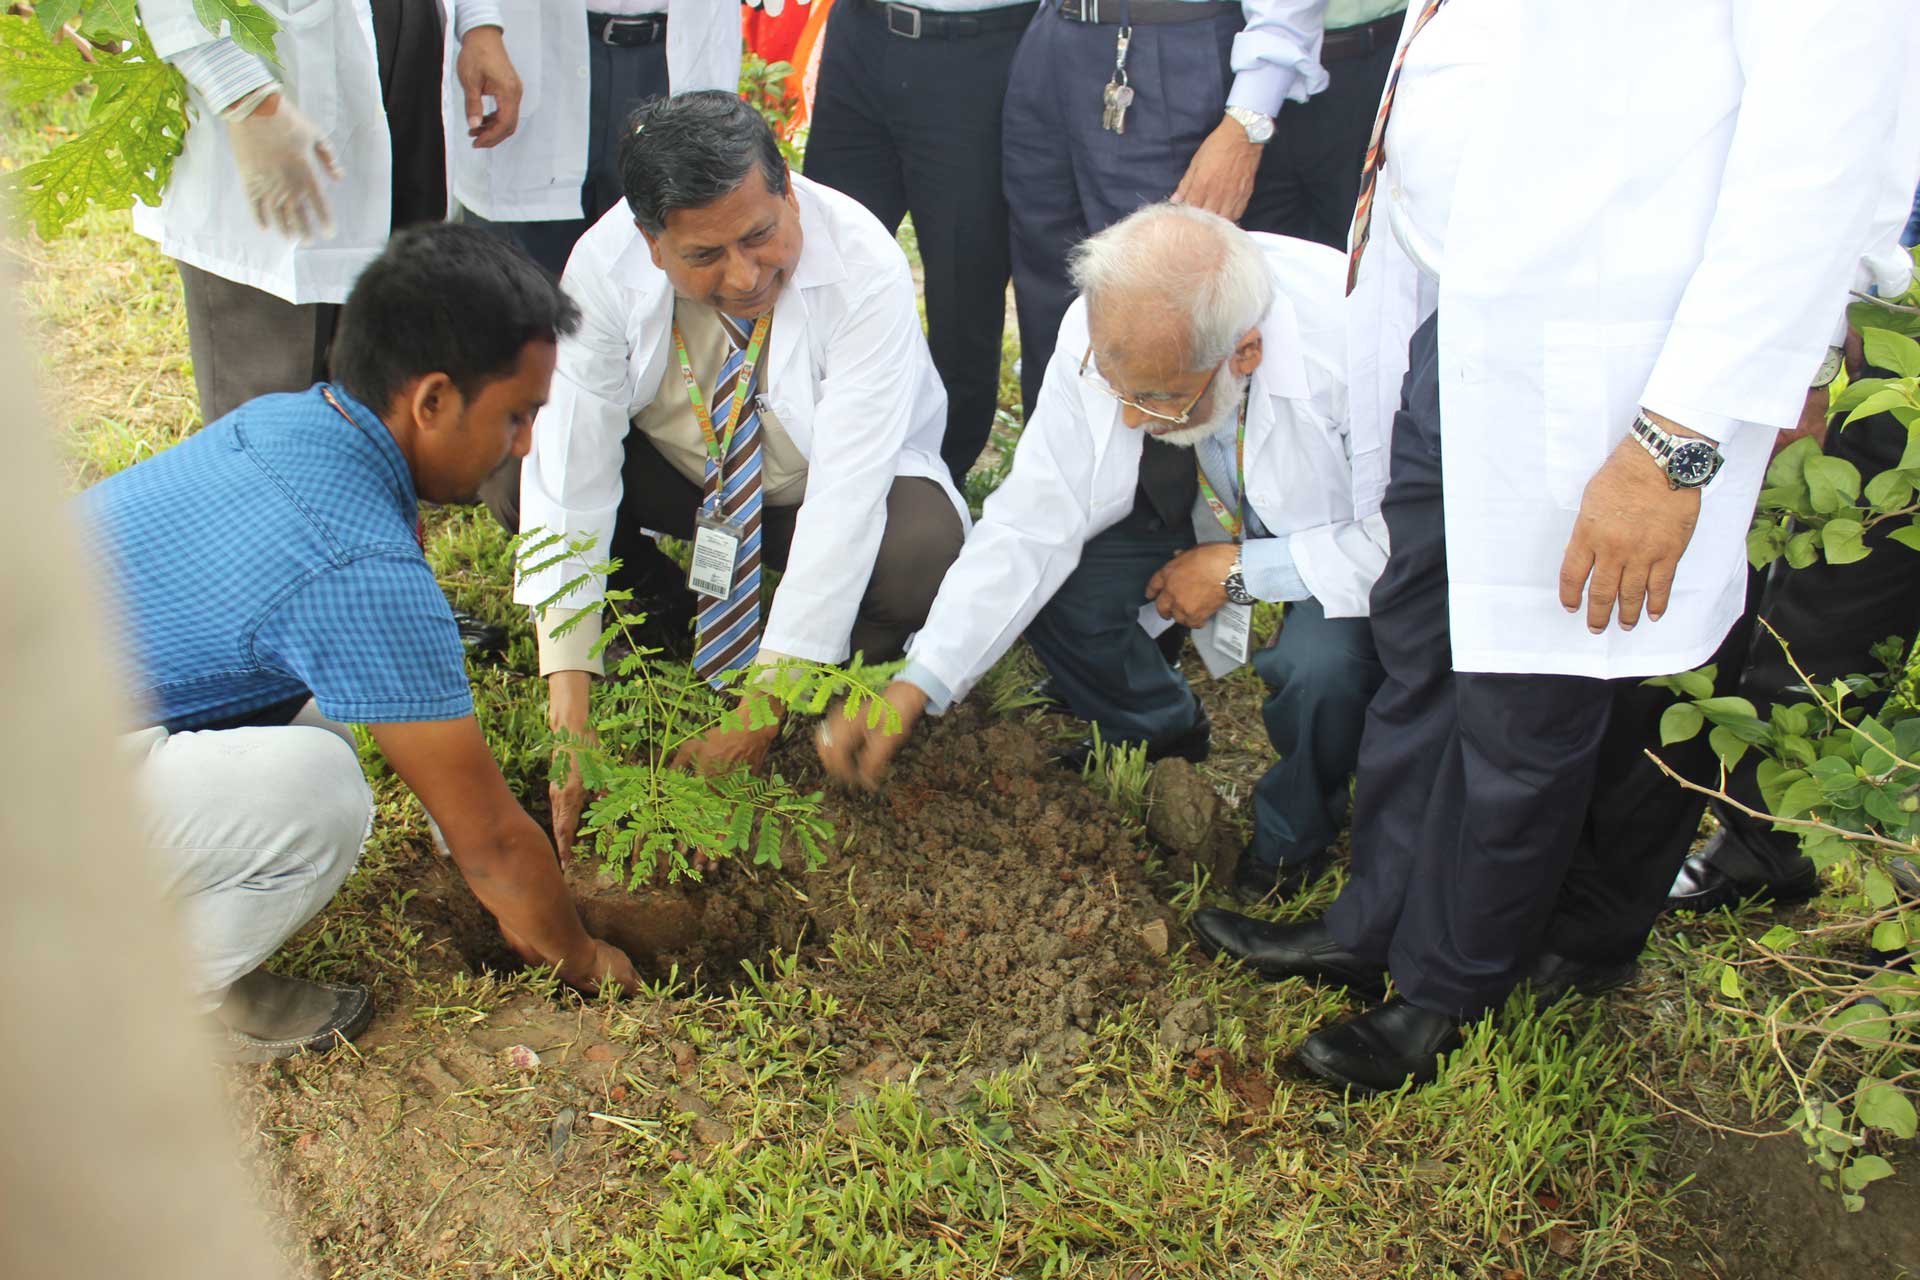 Prof. Dr. MA Rab, Mr. Mesbahul Islam, DNCC, Dr. Muyeed, DAE and other faculty members planting tree